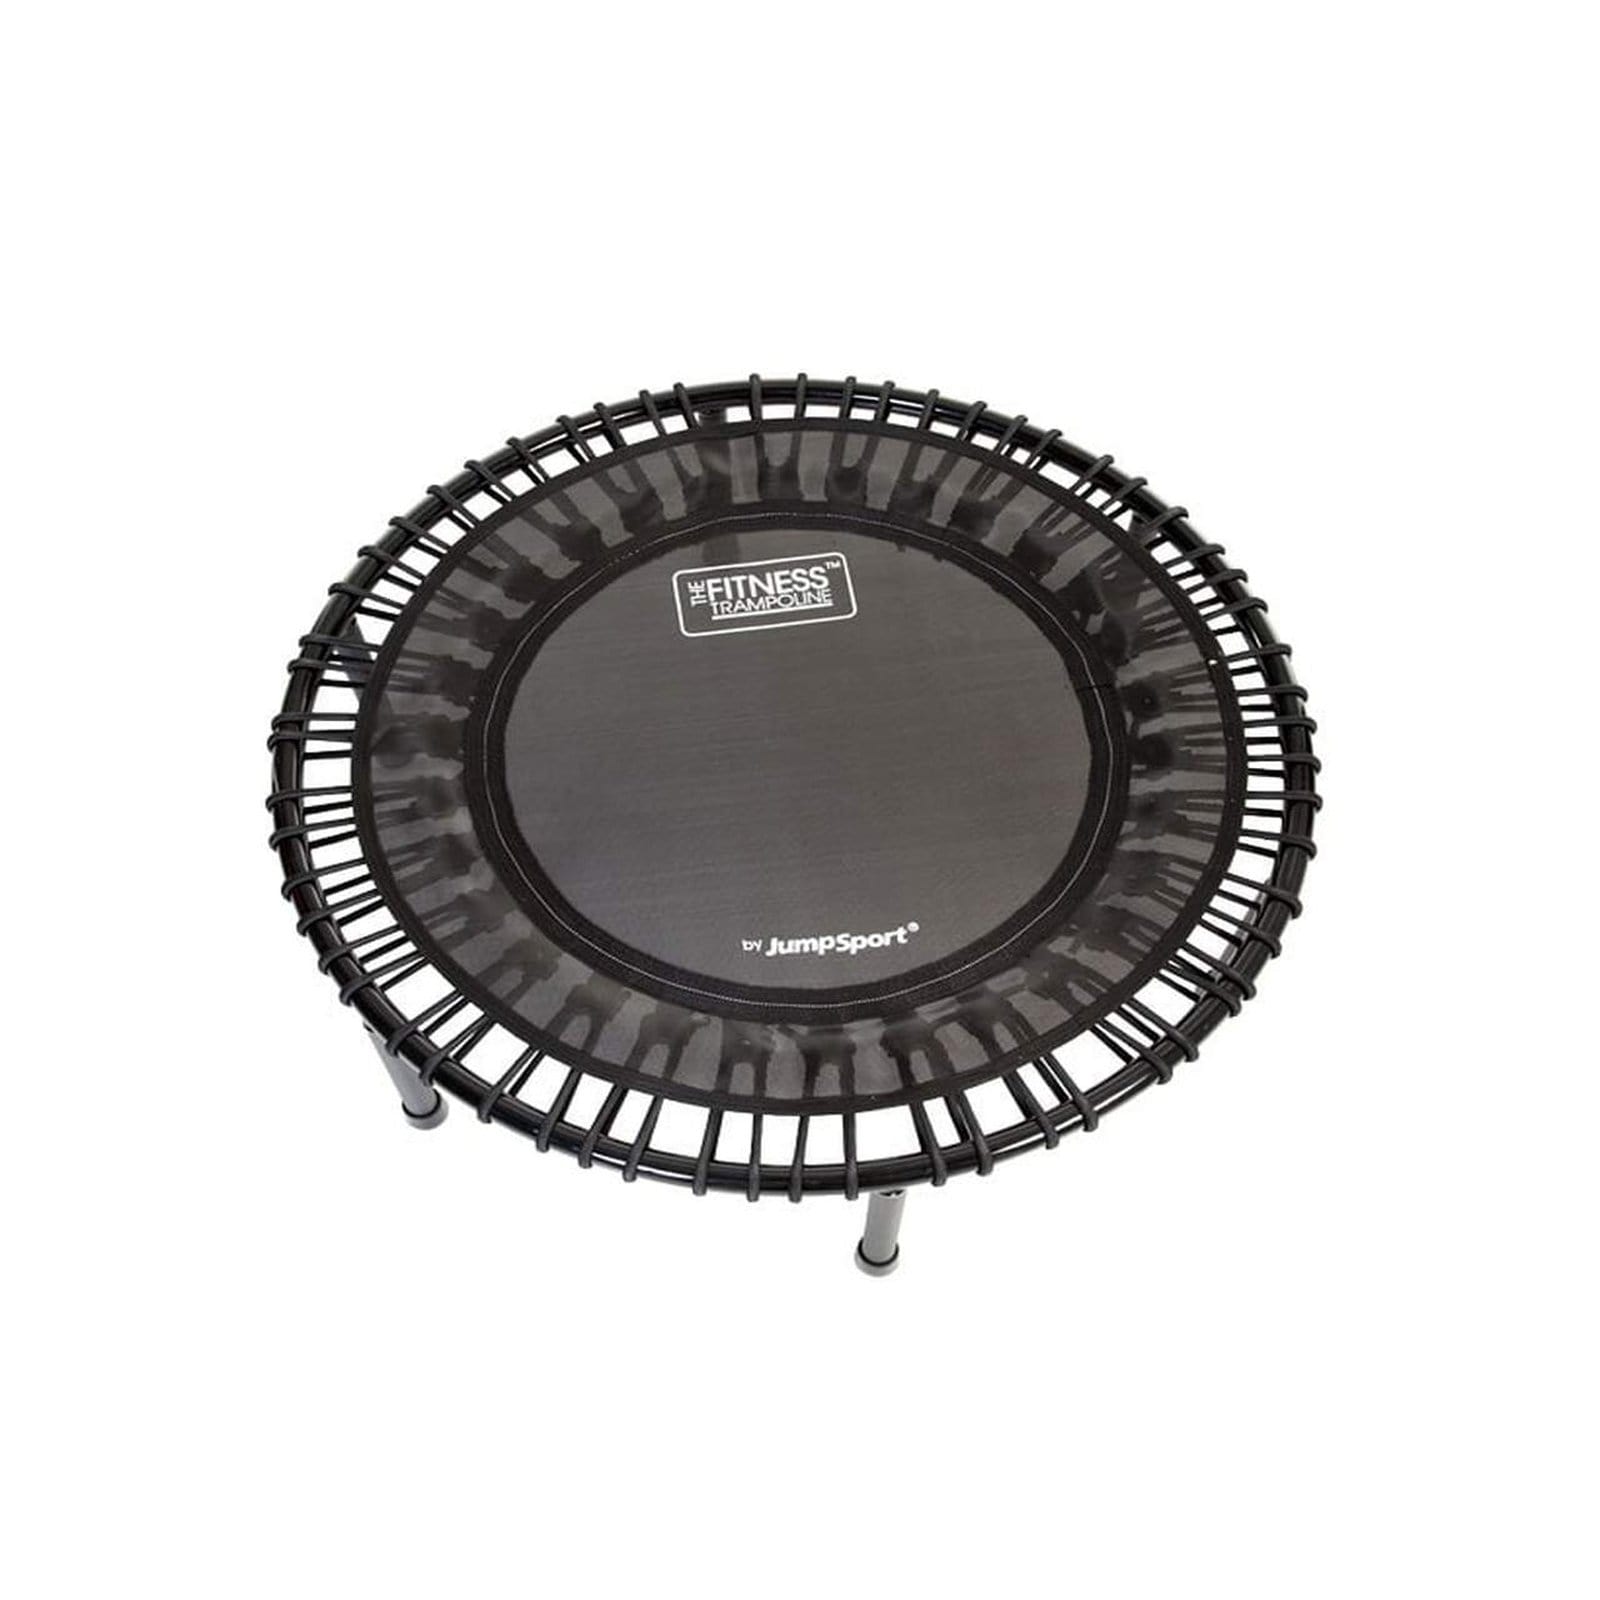 JumpSport Fitness 200 Series In Home Low-Impact Exercise Trampolines